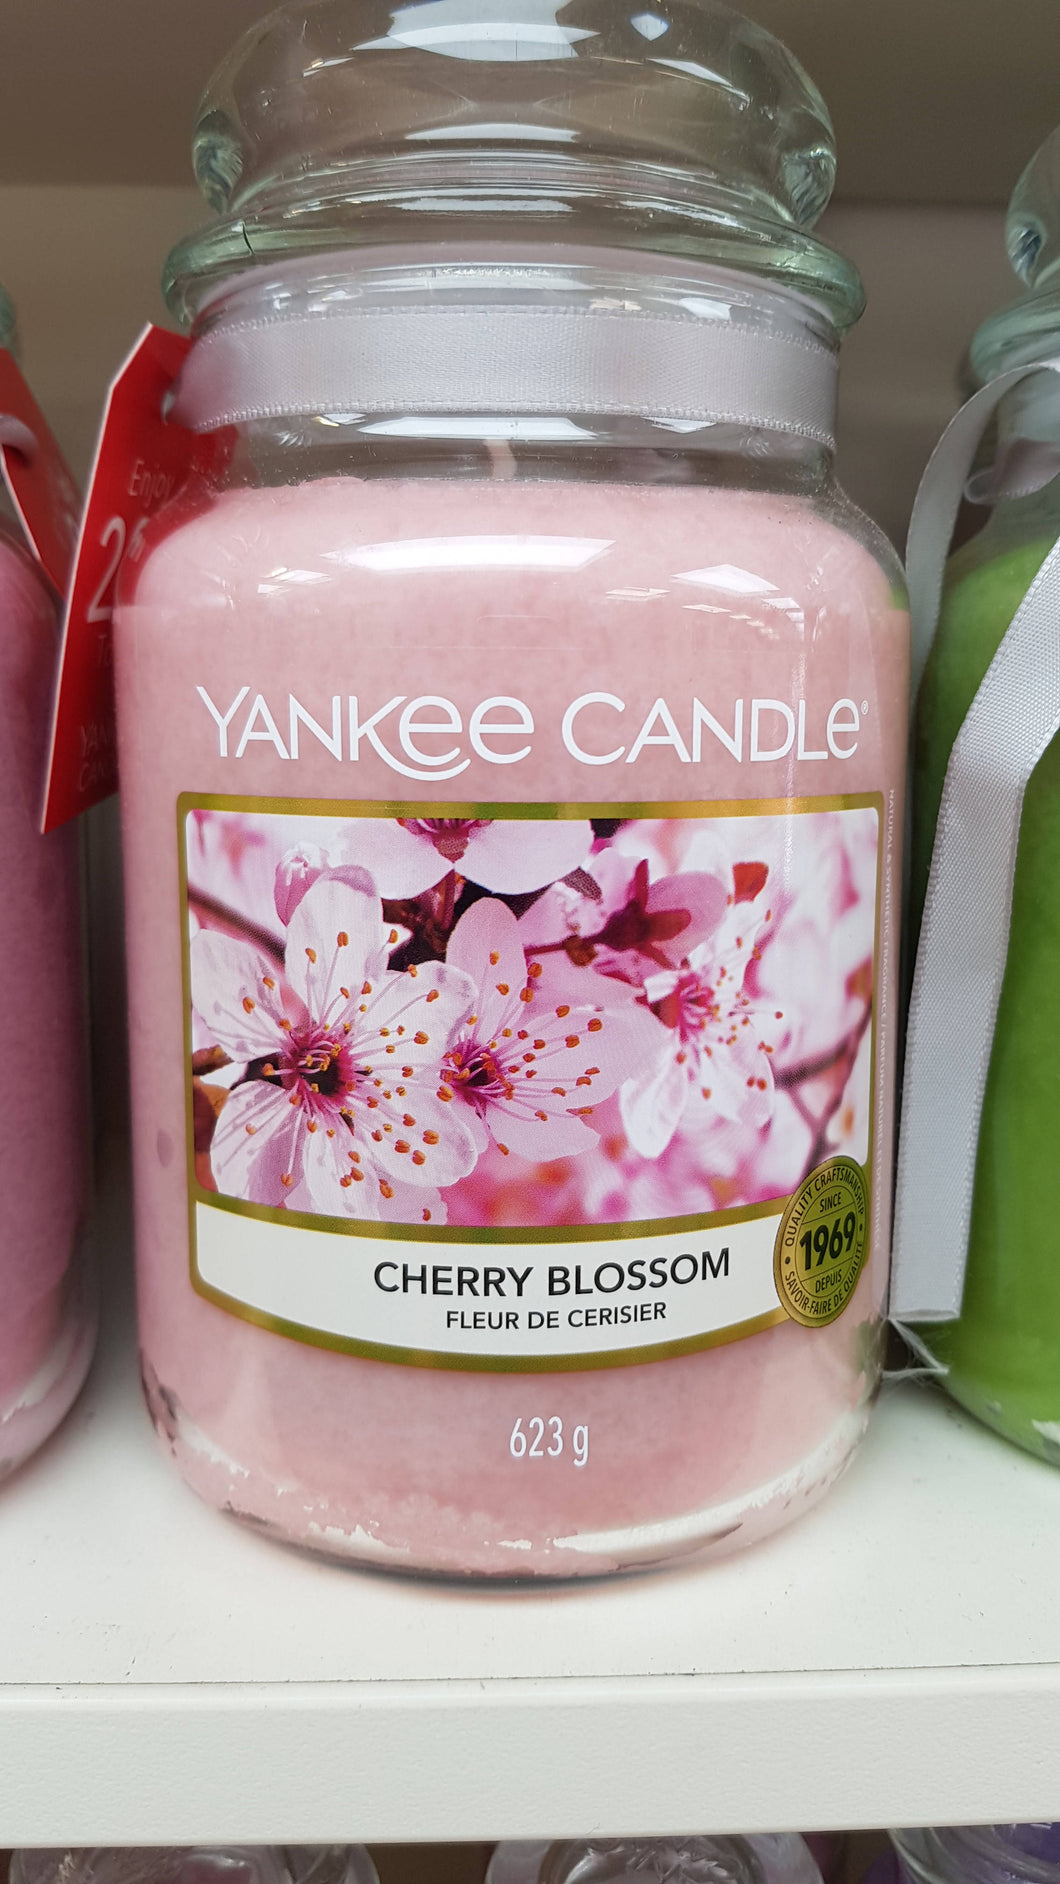 Cherry Blossom Yankee Candle